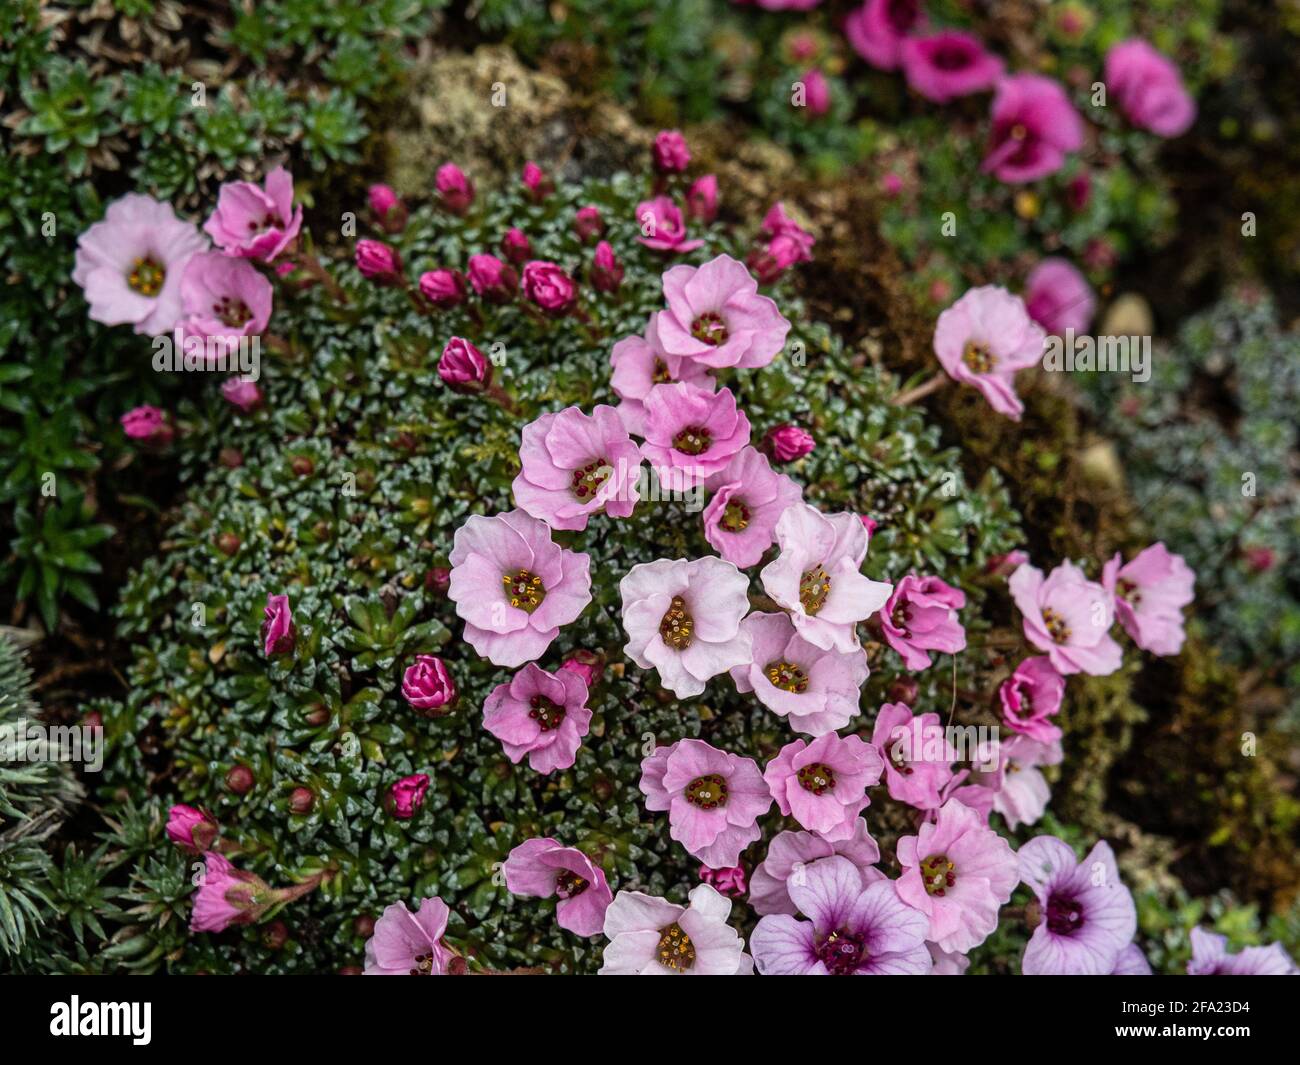 A plant of the kabschia Saxifrage Tysoe Pink Perfection growing in a terracotta pan and showing the pink flowers Stock Photo